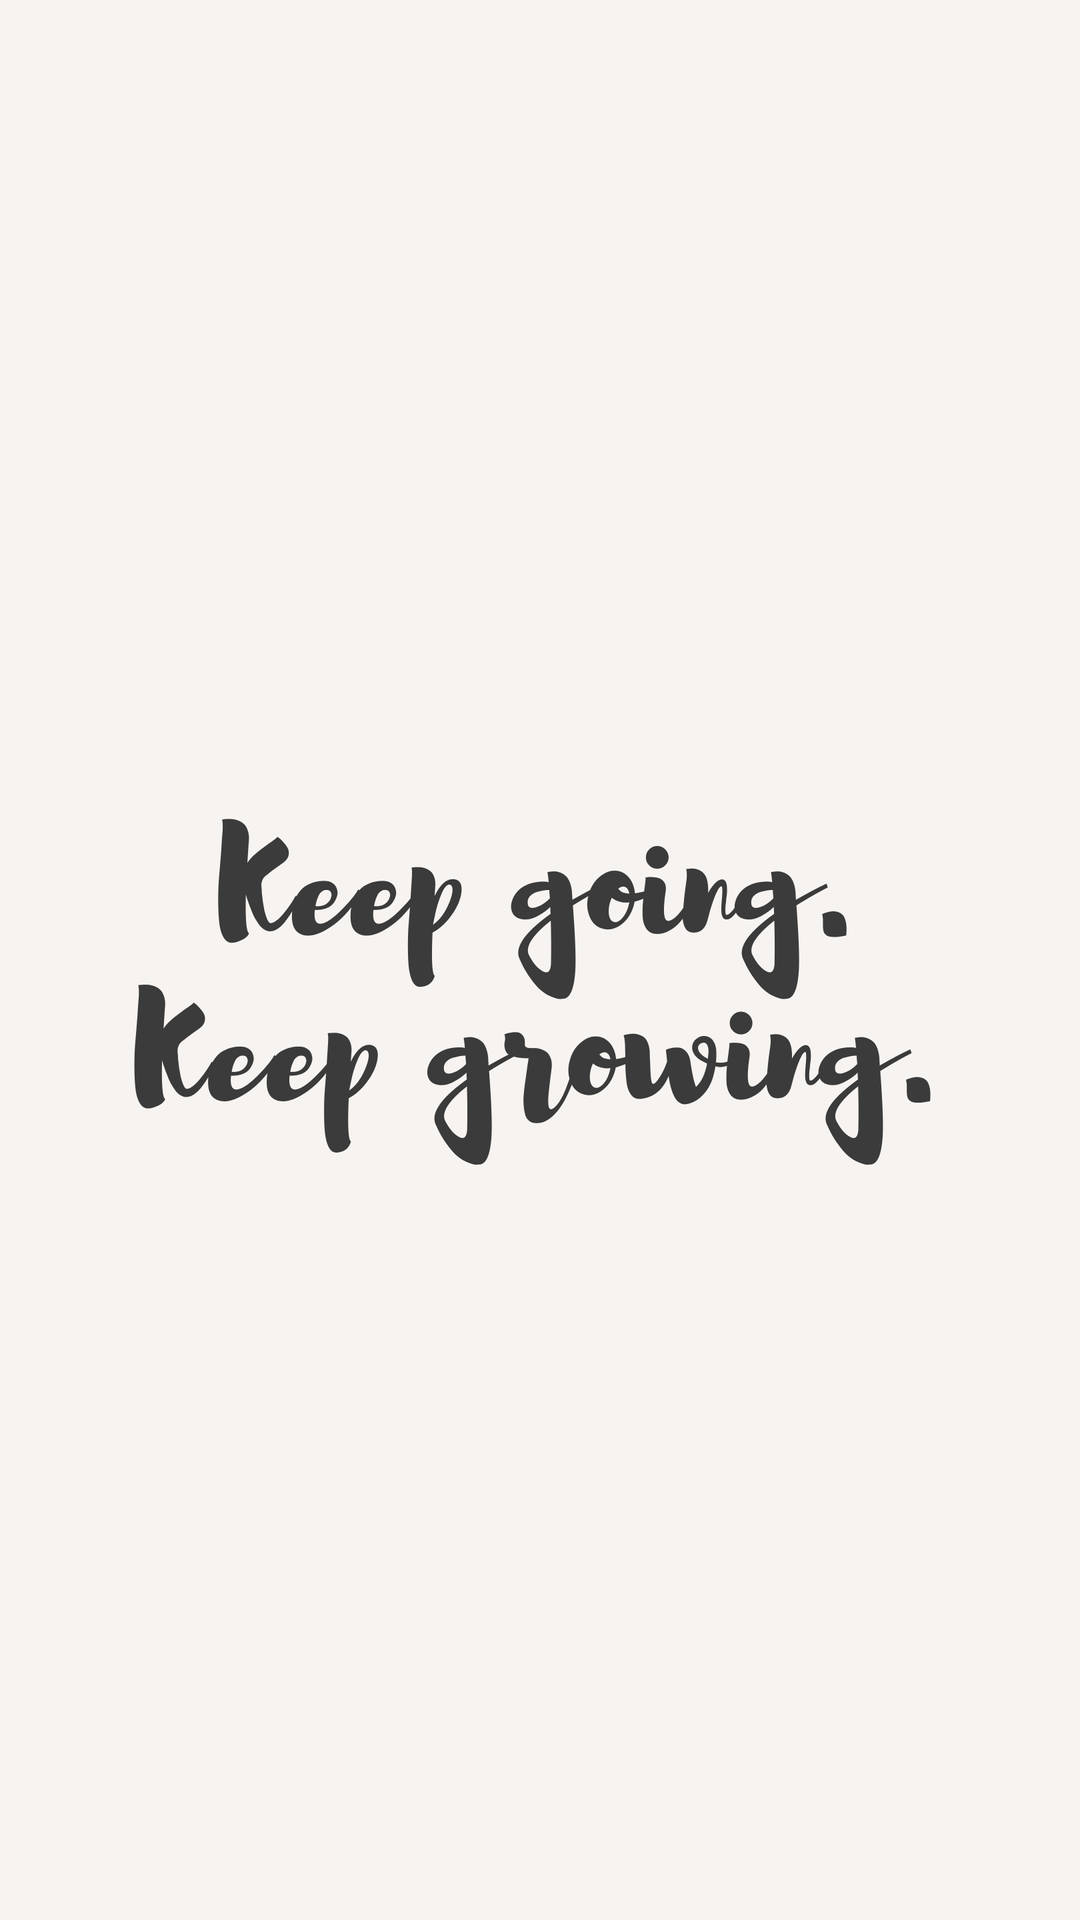 Motivational Quote Keep Going Background